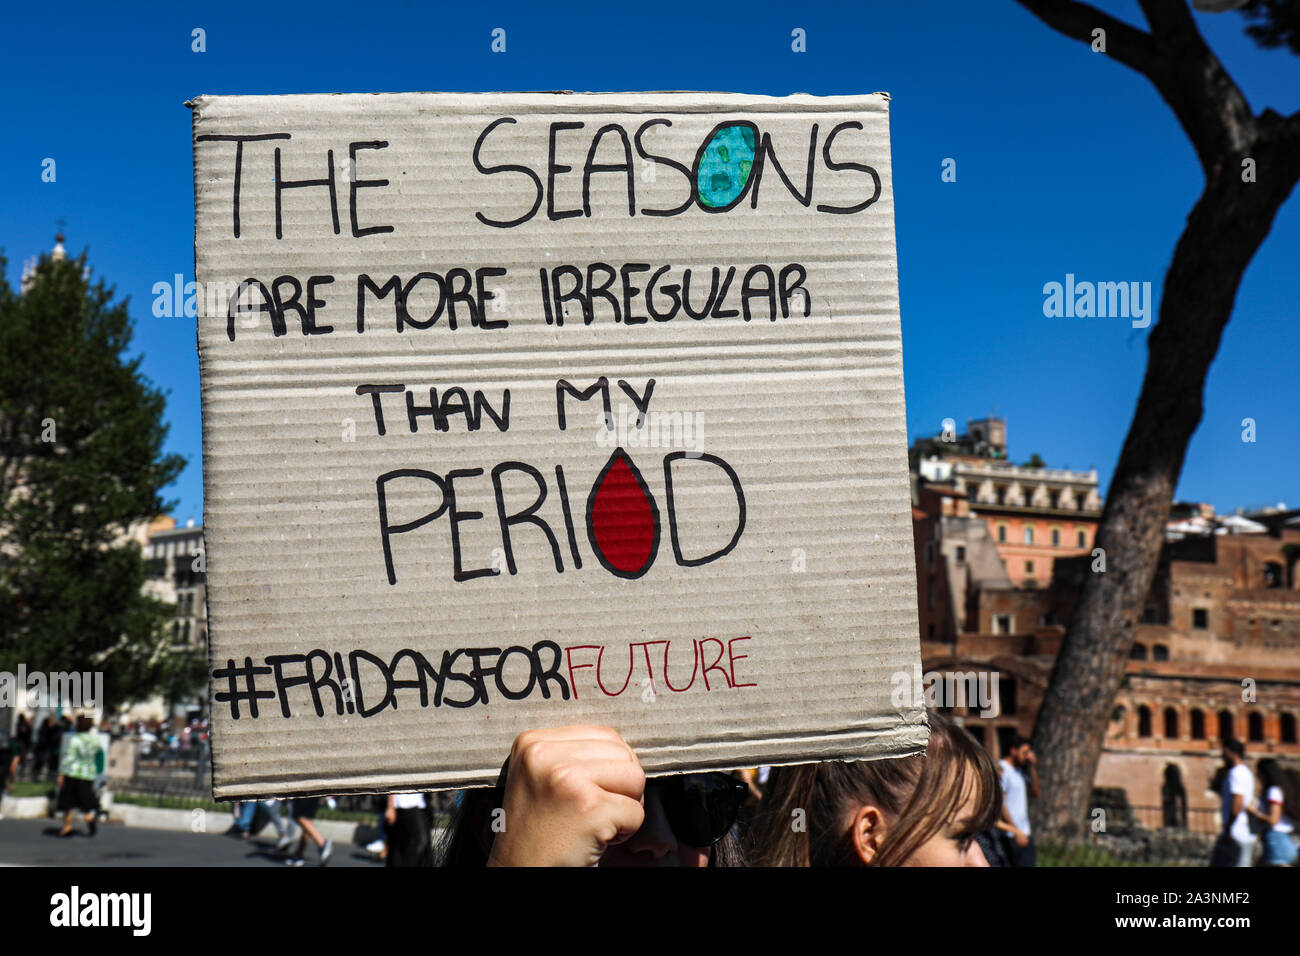 'The seasons are more irregular than my period' -placard. Fridays for future. School strike for climate. 27 Sep 2019. Rome, Italy. Stock Photo